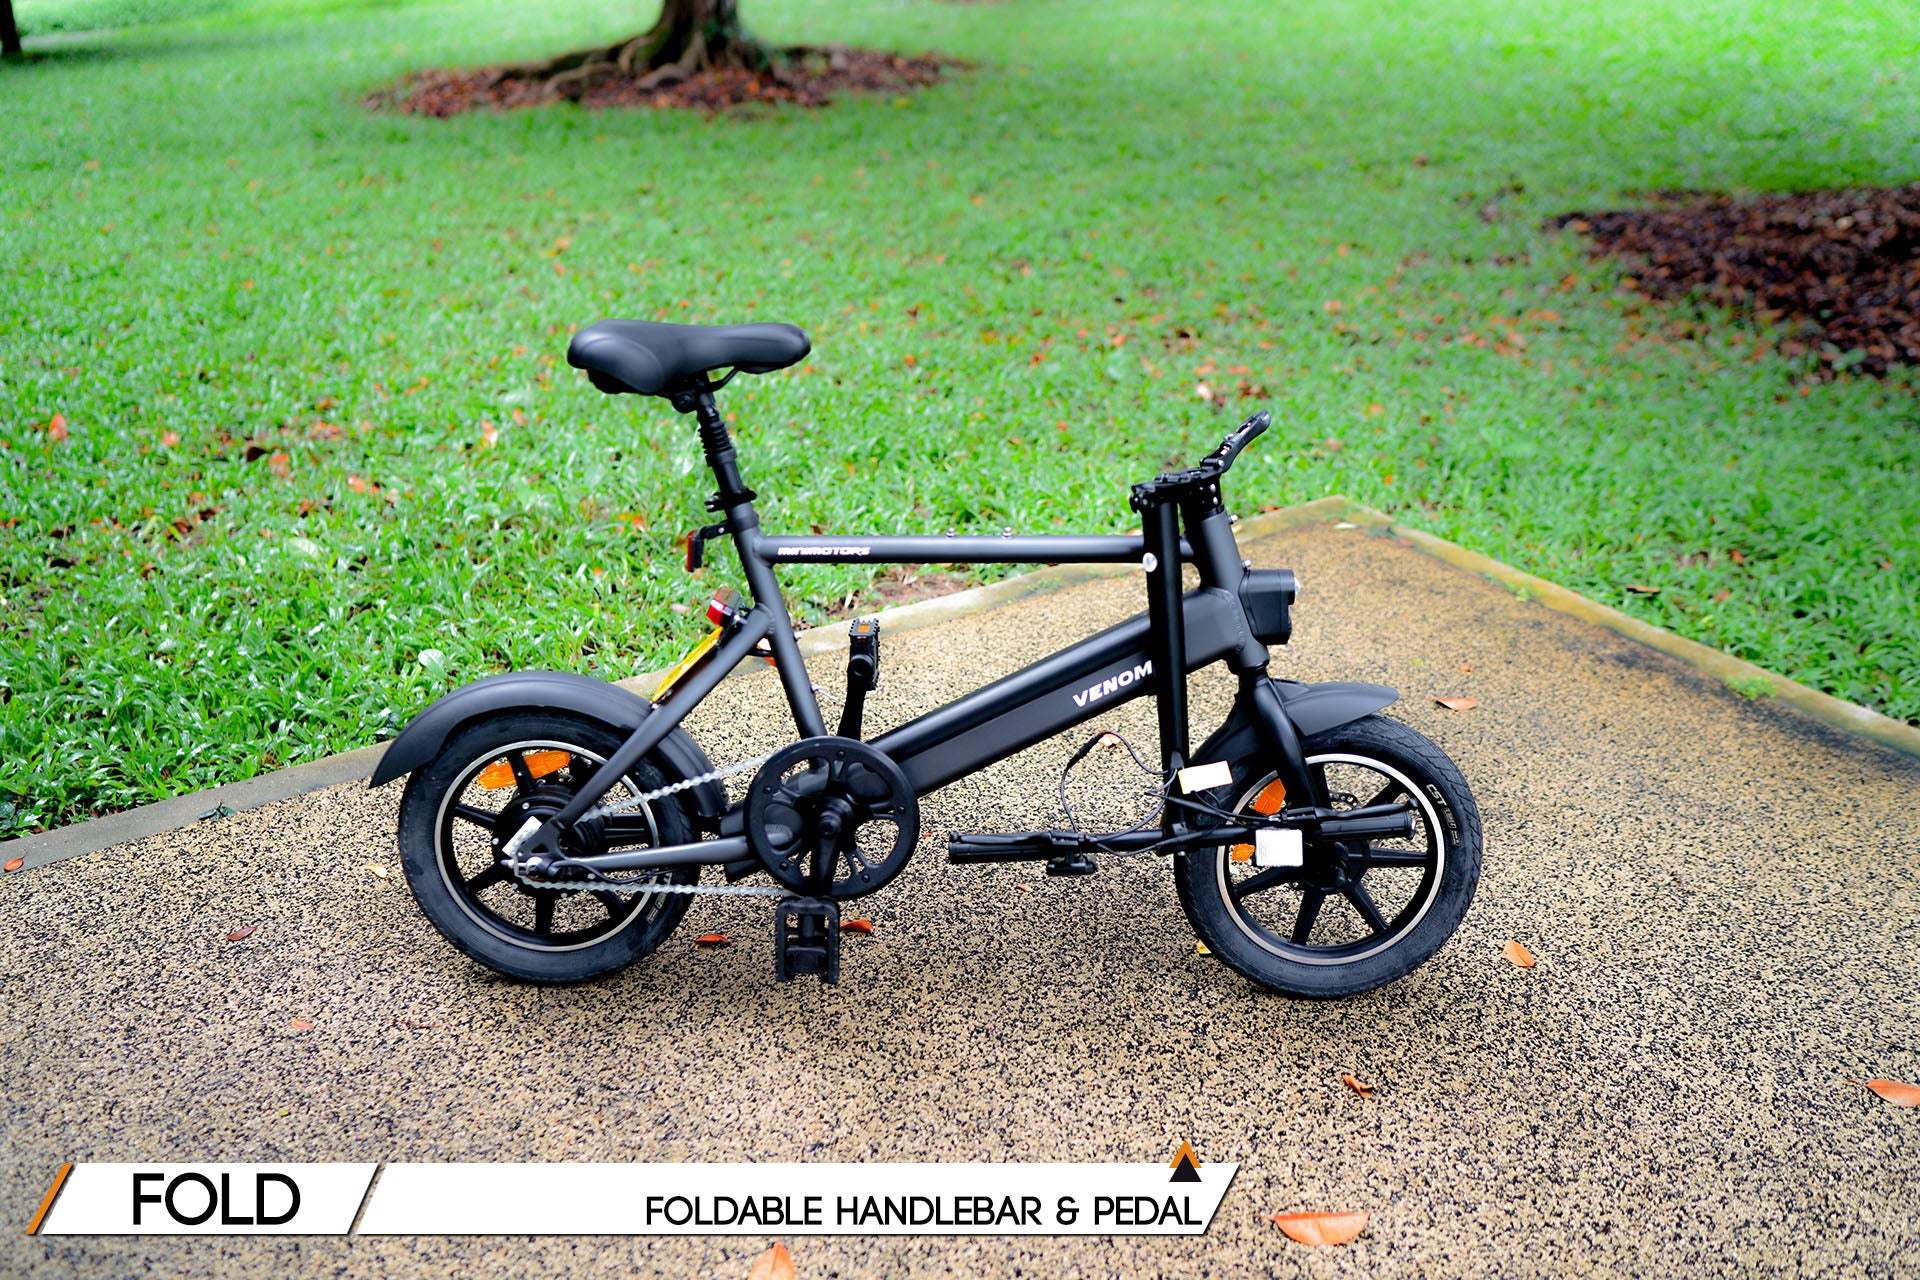 Venom 2 Ebike Review Off 73 Online Shopping Site For Fashion Lifestyle